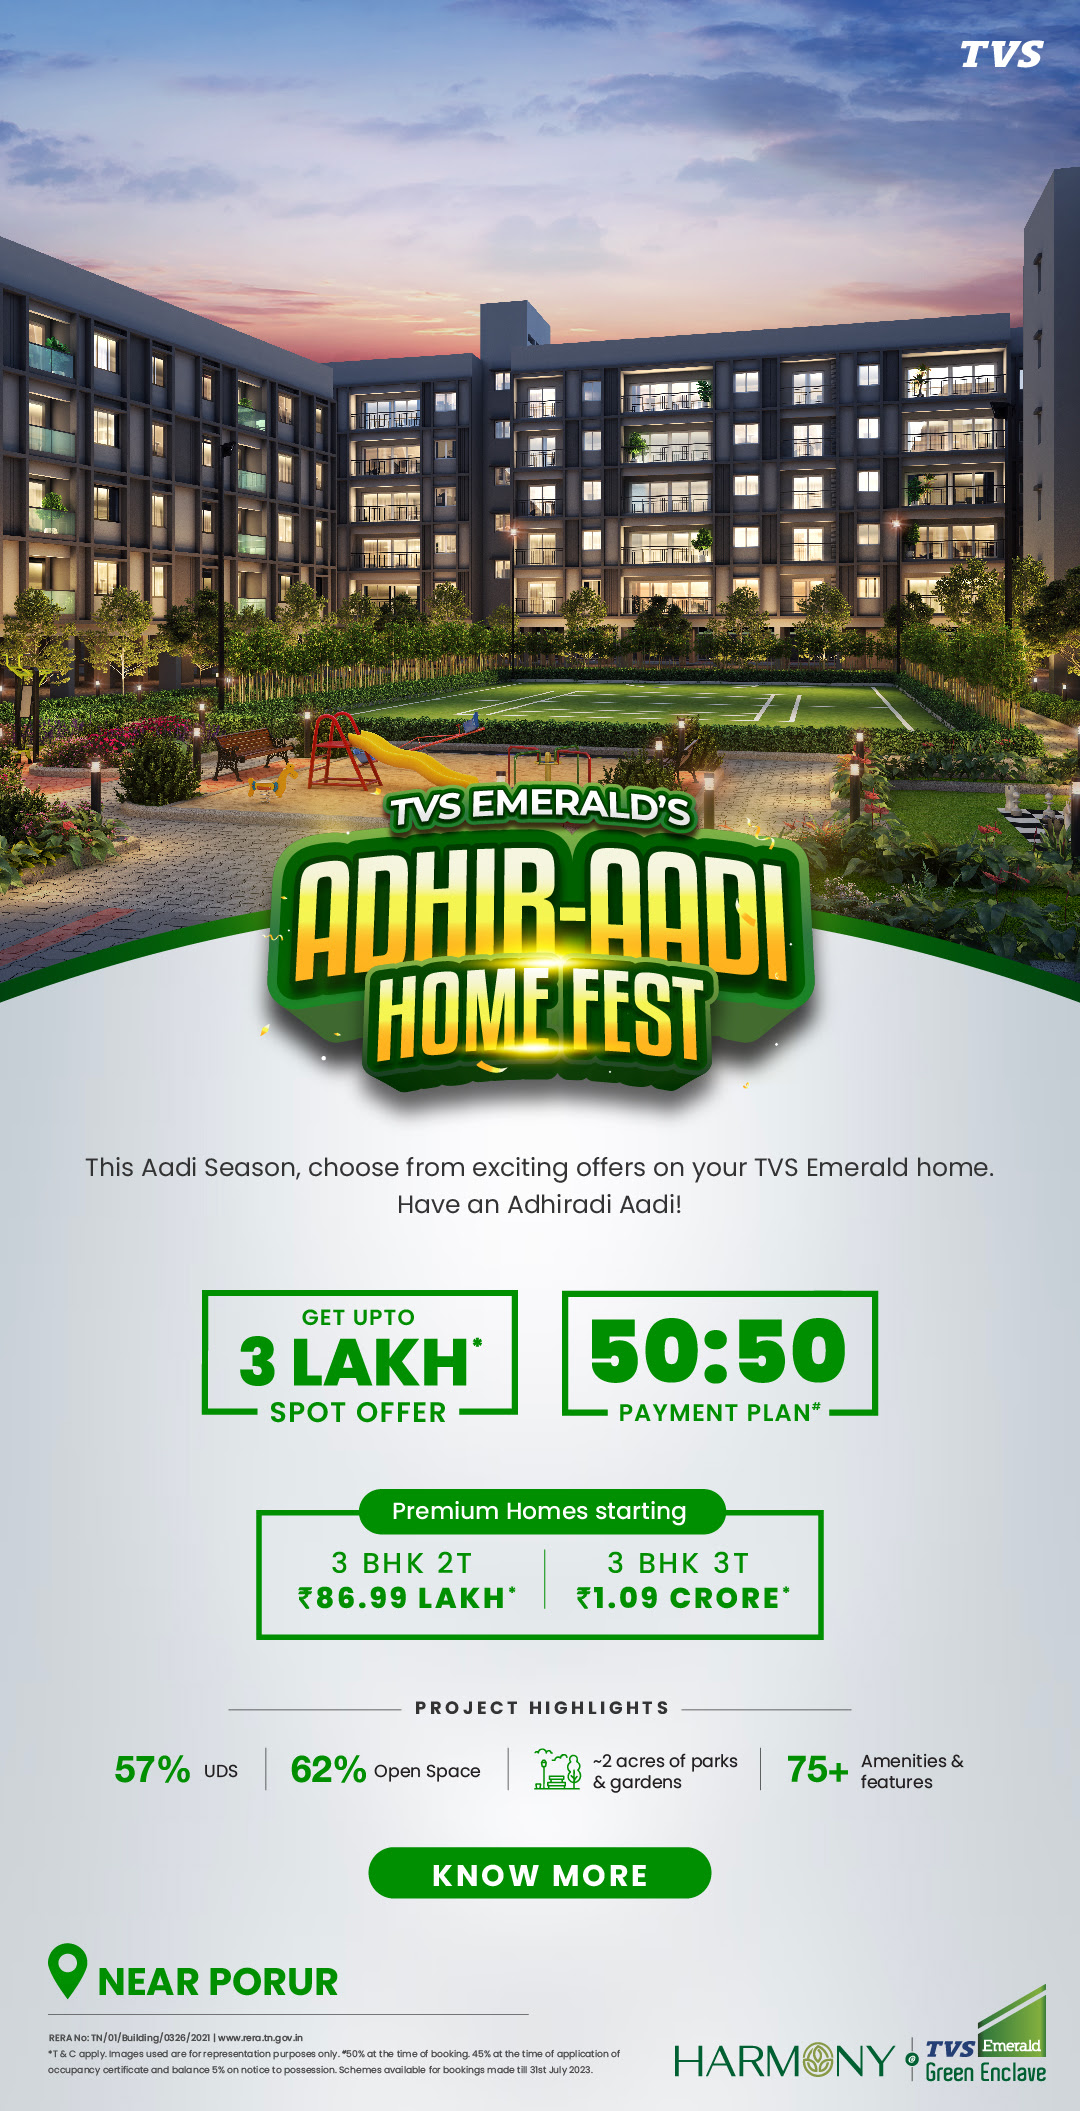 Get upto Rs 3 Lac spot offer at TVS Emerald Green Enclave, Chennai